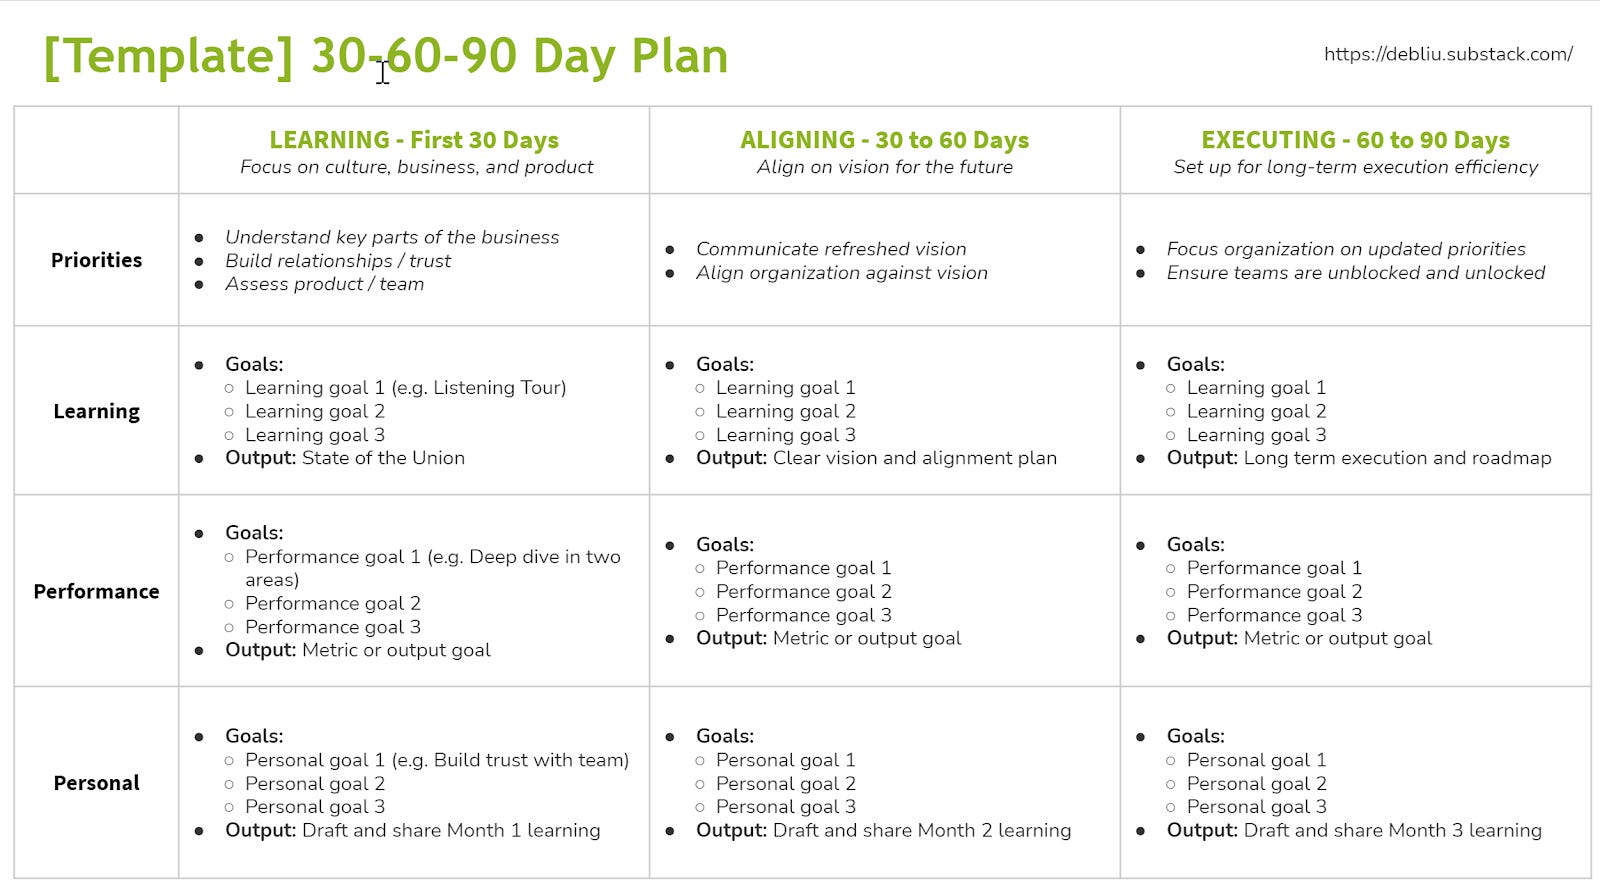 306090 plan examples